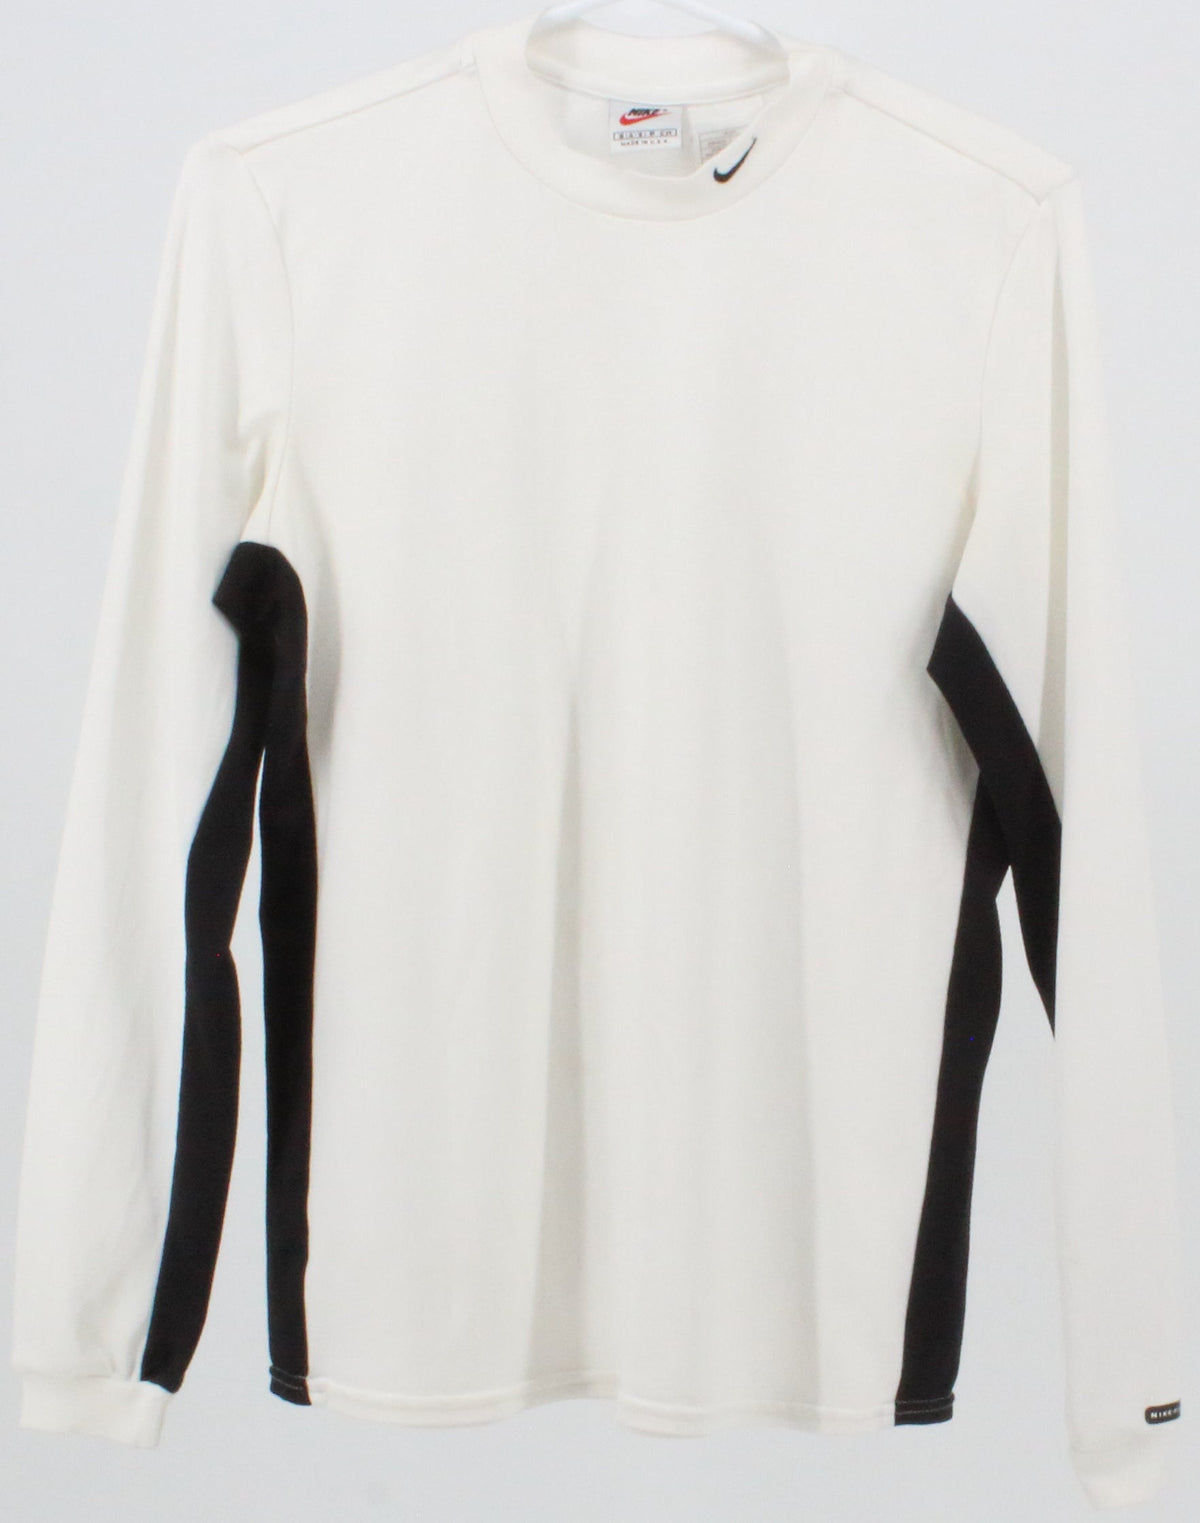 Nike-Fit White and Black Long Sleeve Active T-Shirt